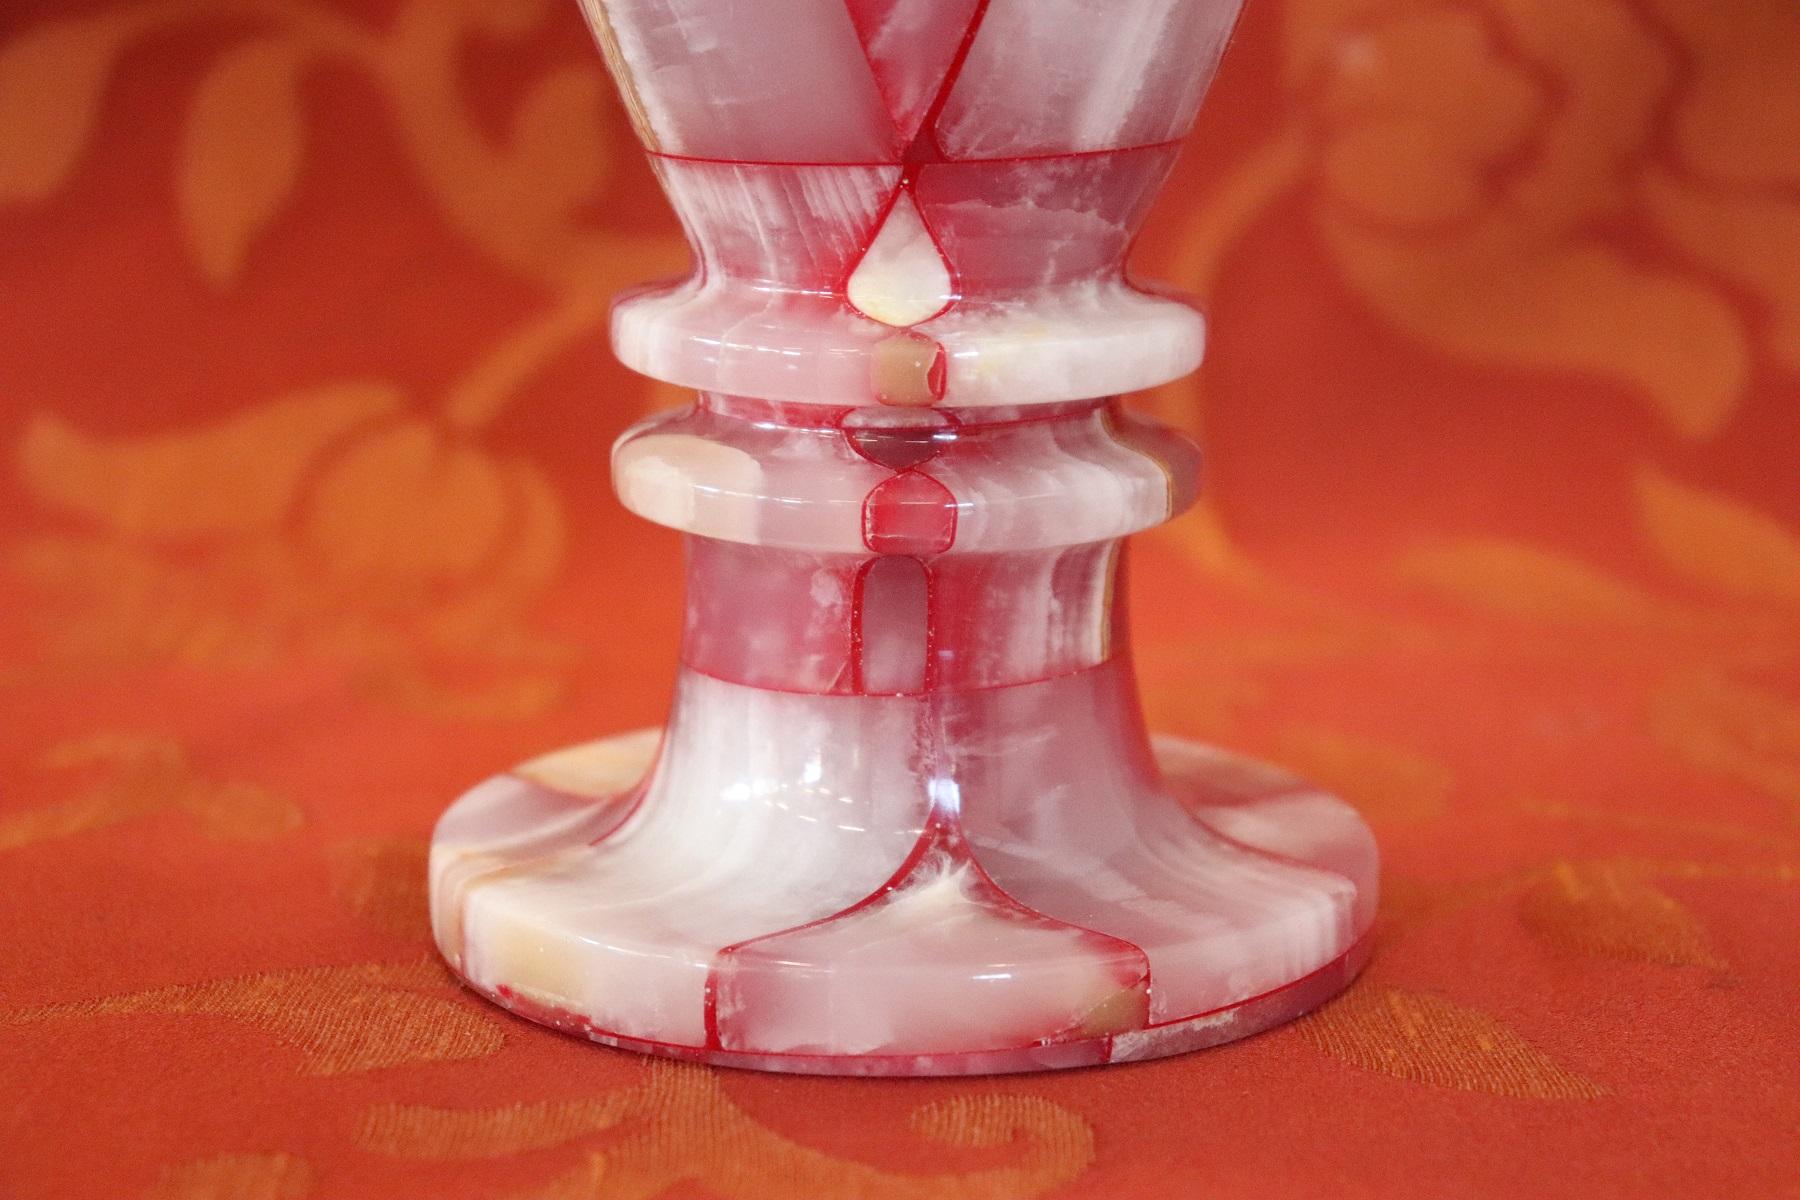 Particular Italian artistic vase made with Carrara marble mosaic tiles. Particular color with pink and red veins.